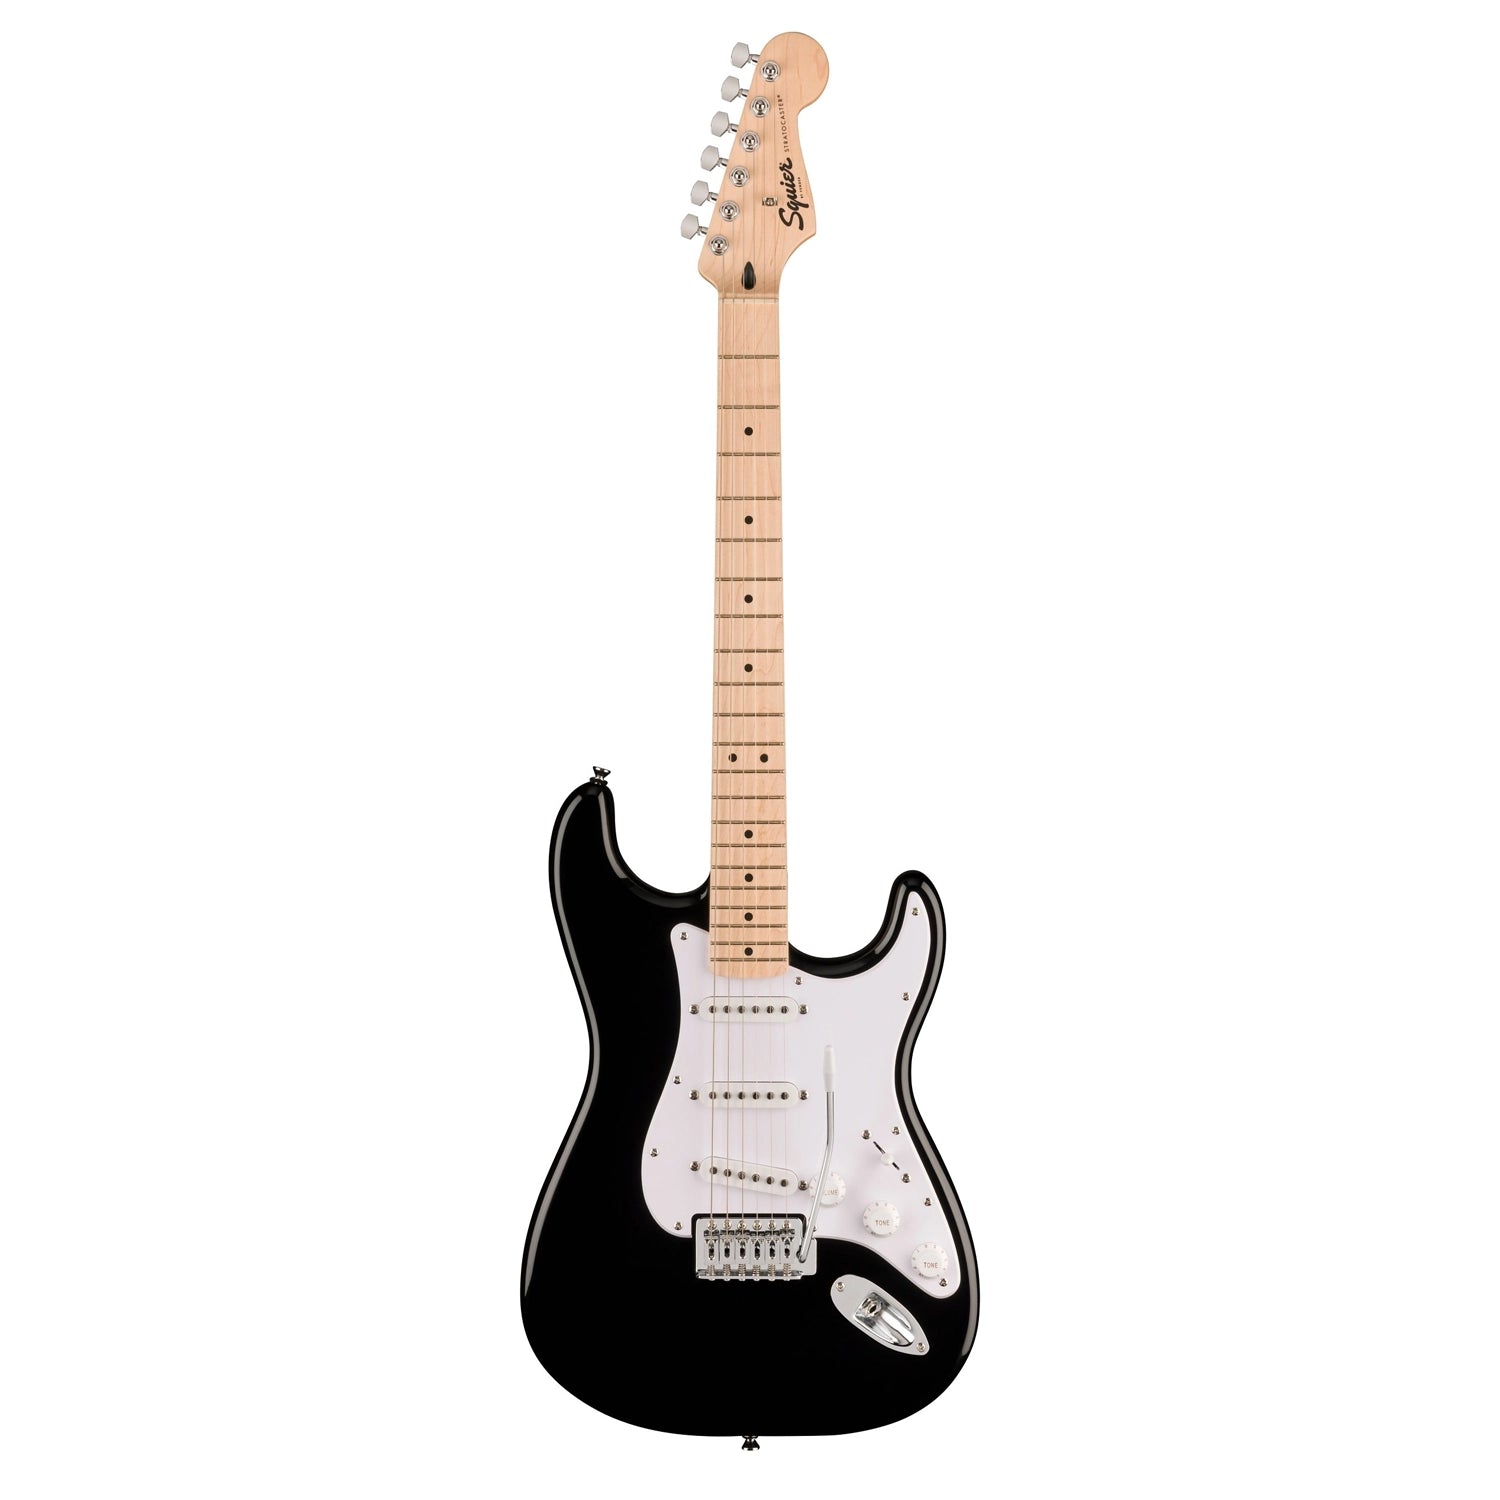 Squier Sonic Stratocaster Electric Guitar - Black